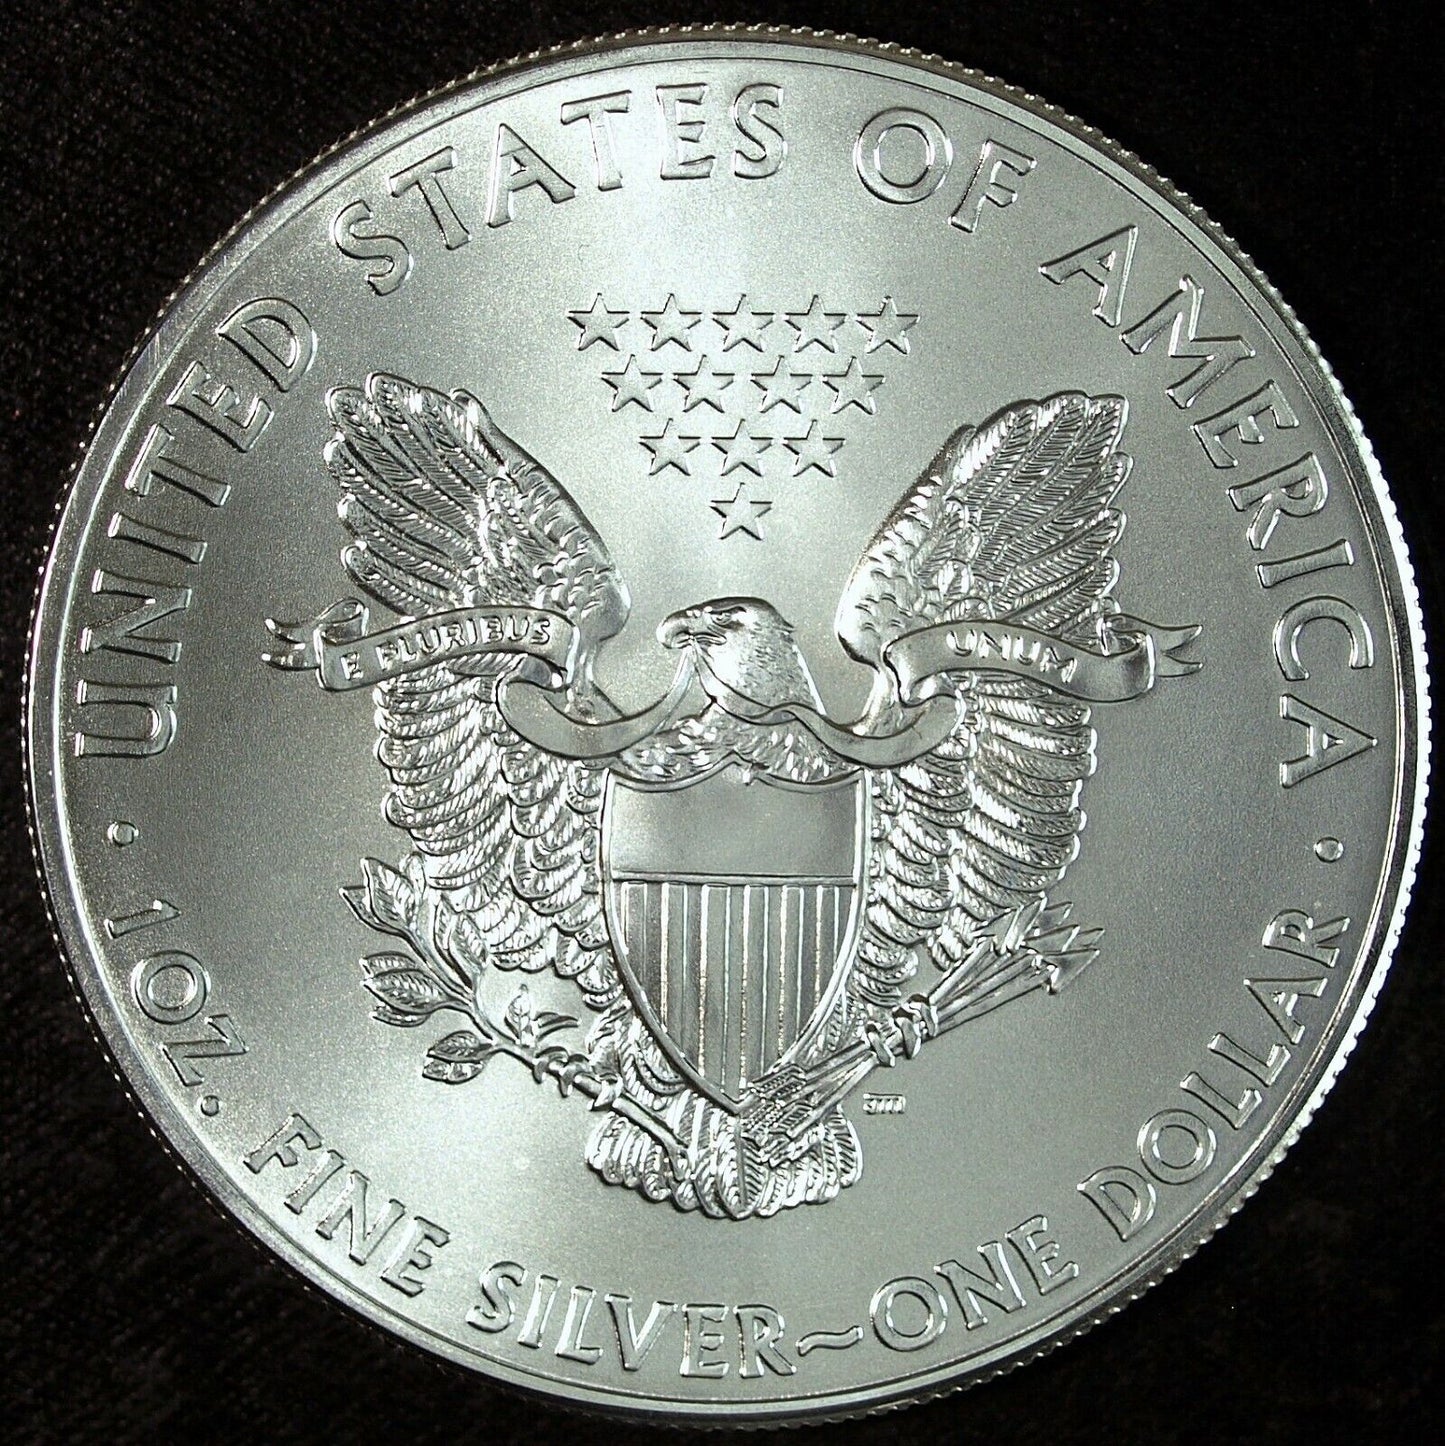 2014 American Silver Eagle ☆☆ Uncirculated ☆☆ Great Collectible 219